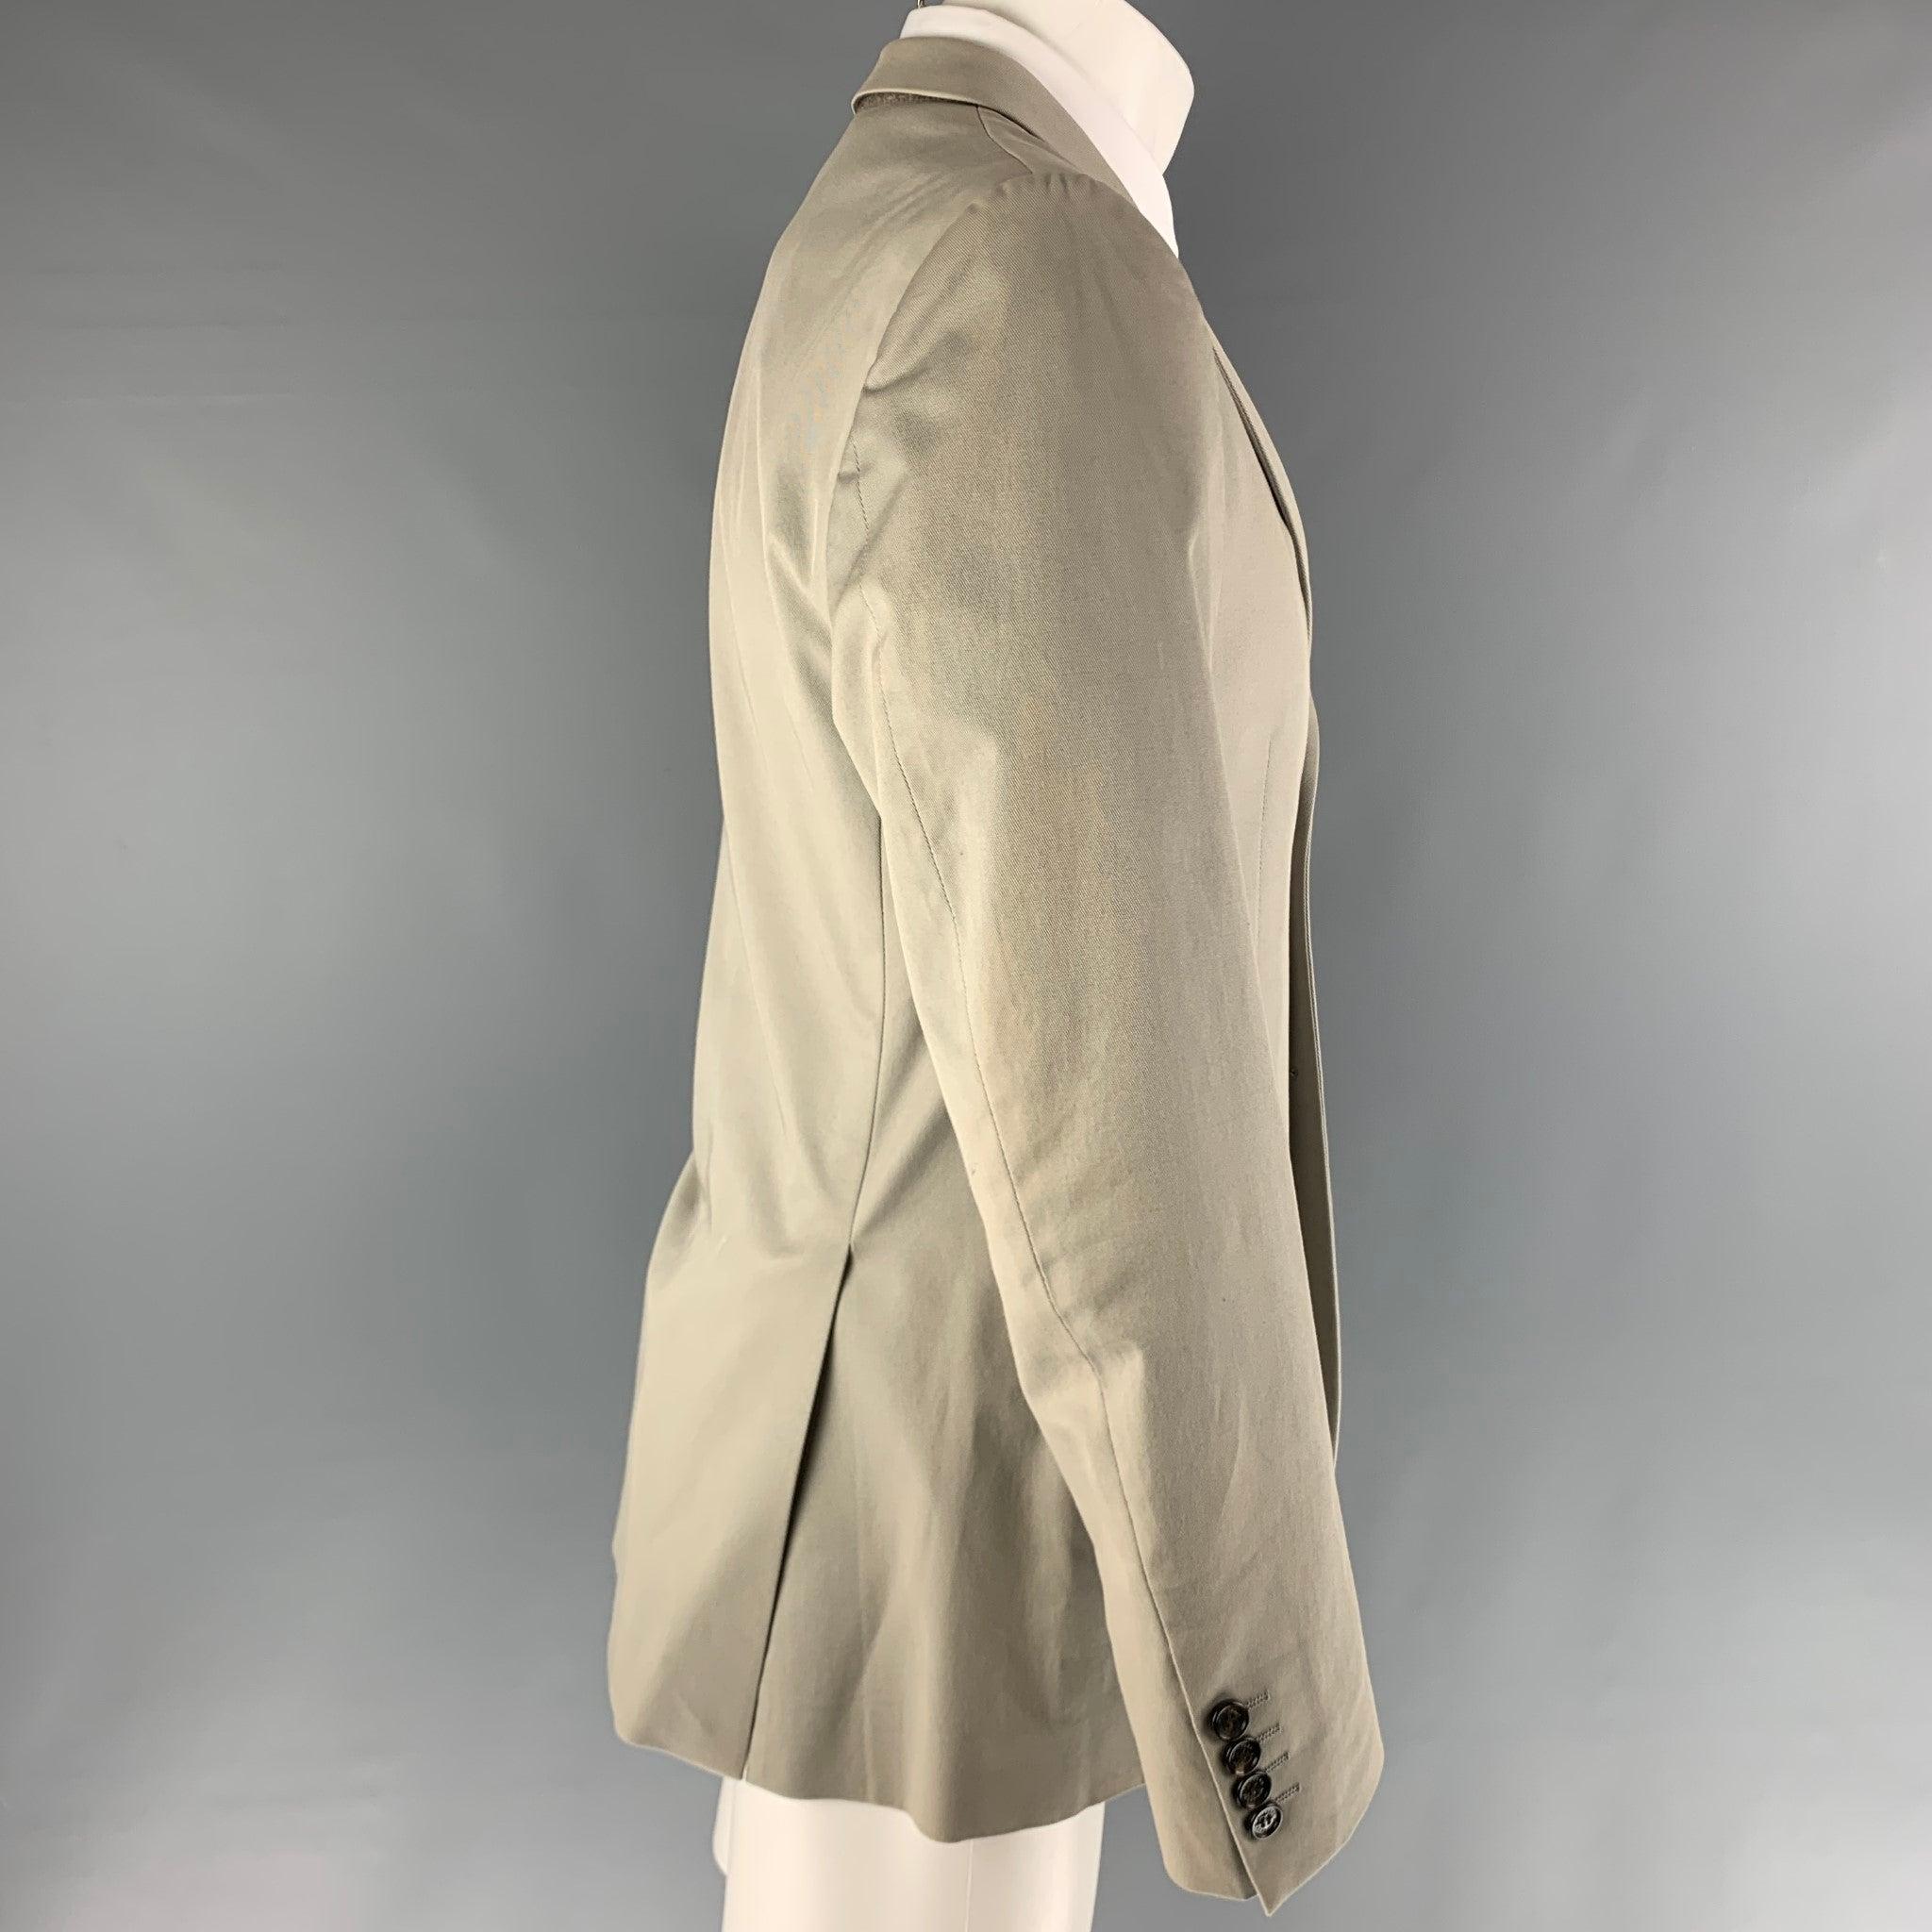 BURBERRY LONDON grey sport coat comes in a grey cotton & elastane blend featuring a single breasted cut and flap pockets, and notch lapel. Made in Portugal.Excellent Pre-Owned Condition. 

Marked:   50 

Measurements: 
 
Shoulder: 18 inches Chest: